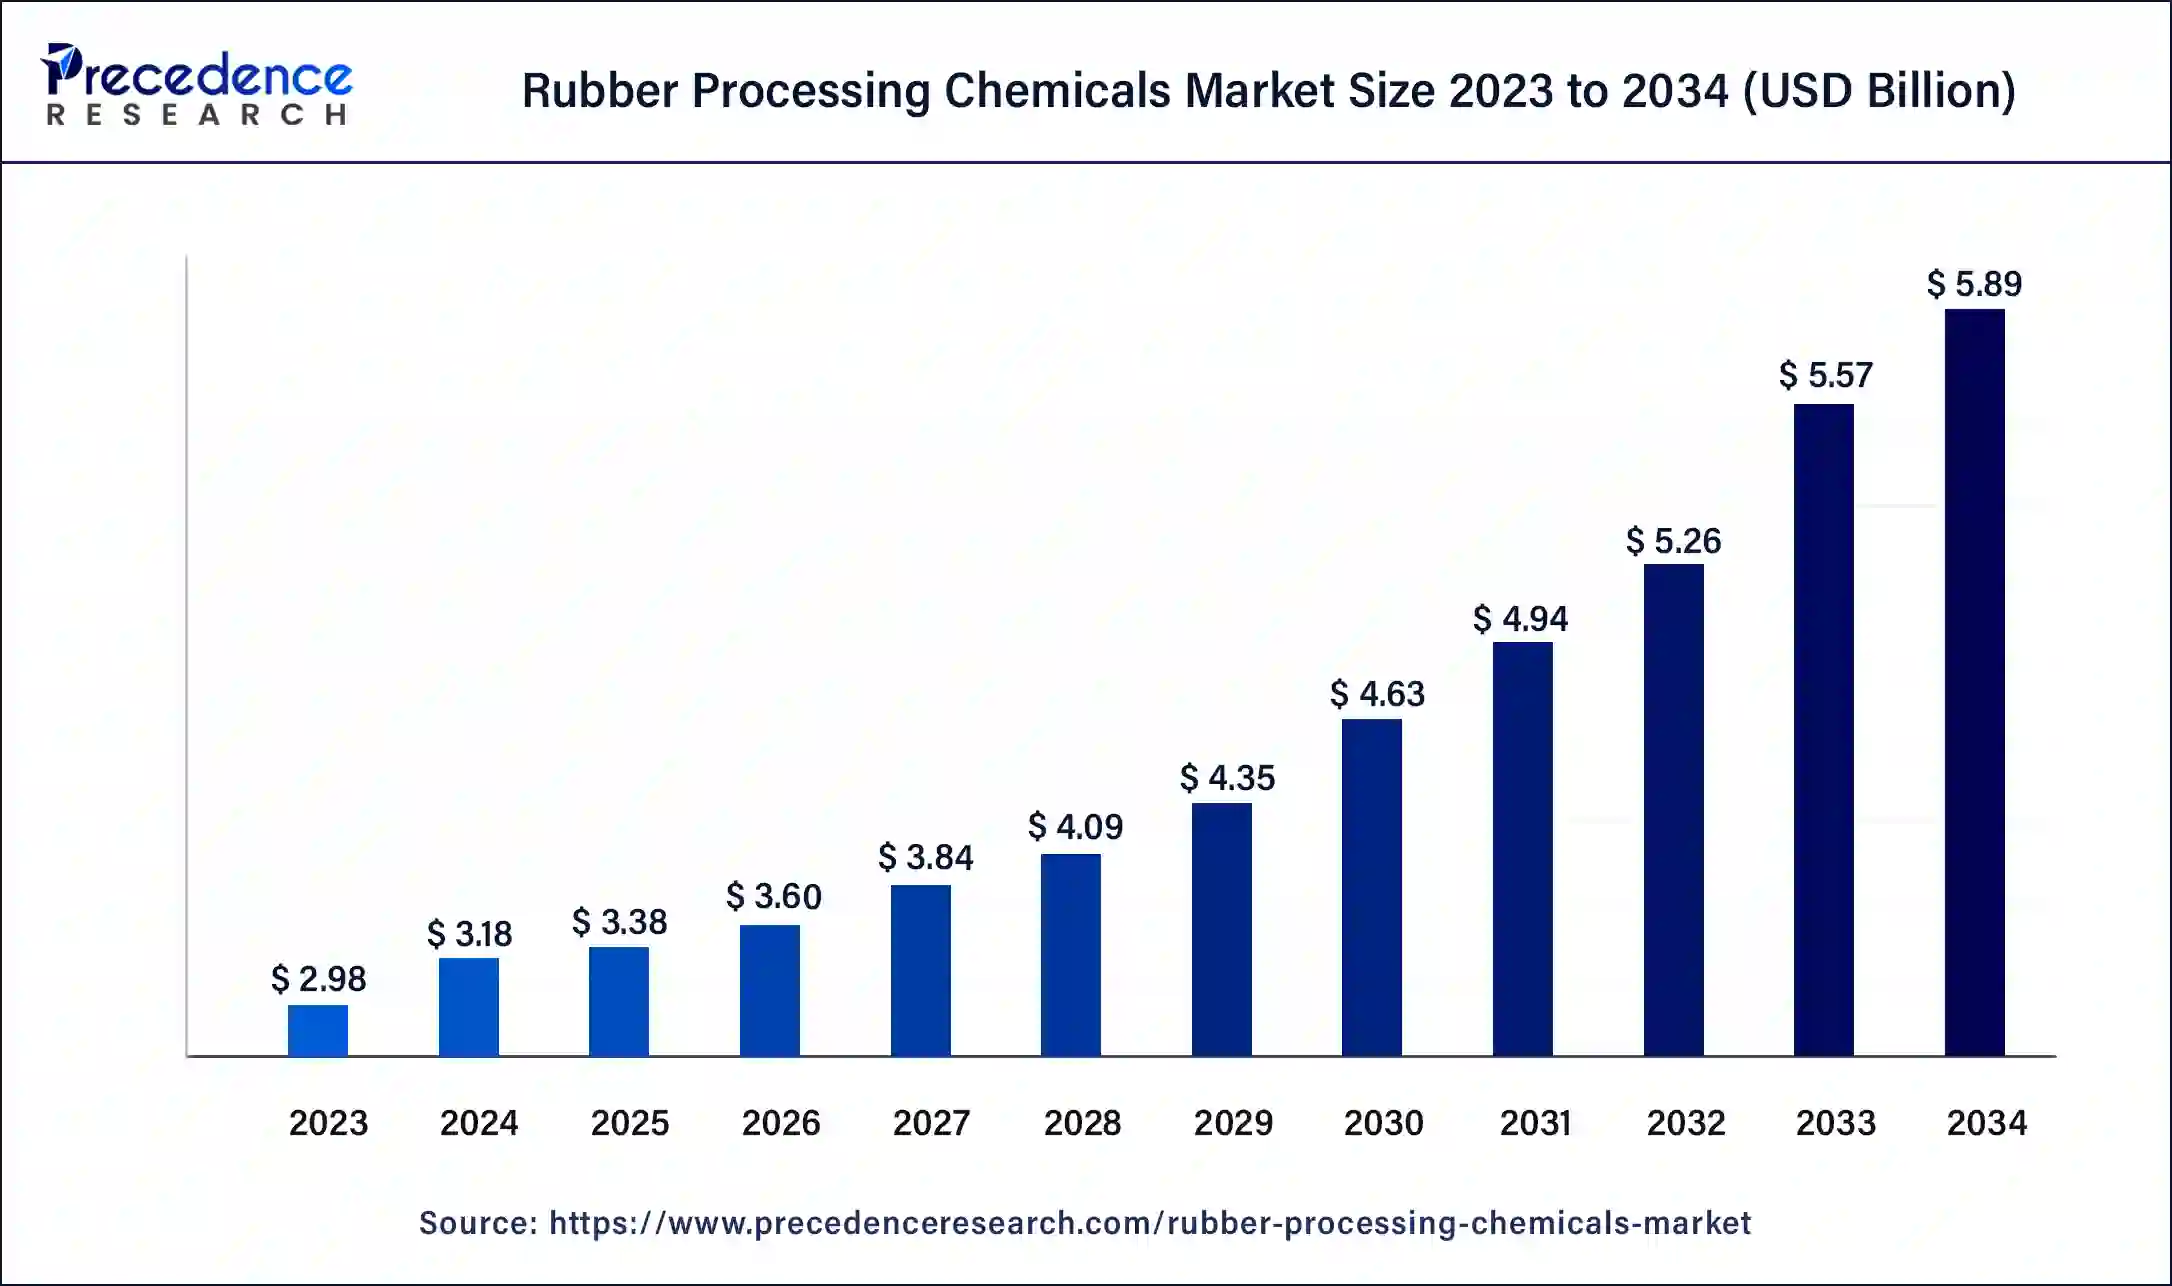 Rubber Processing Chemicals Market Size 2024 to 2034